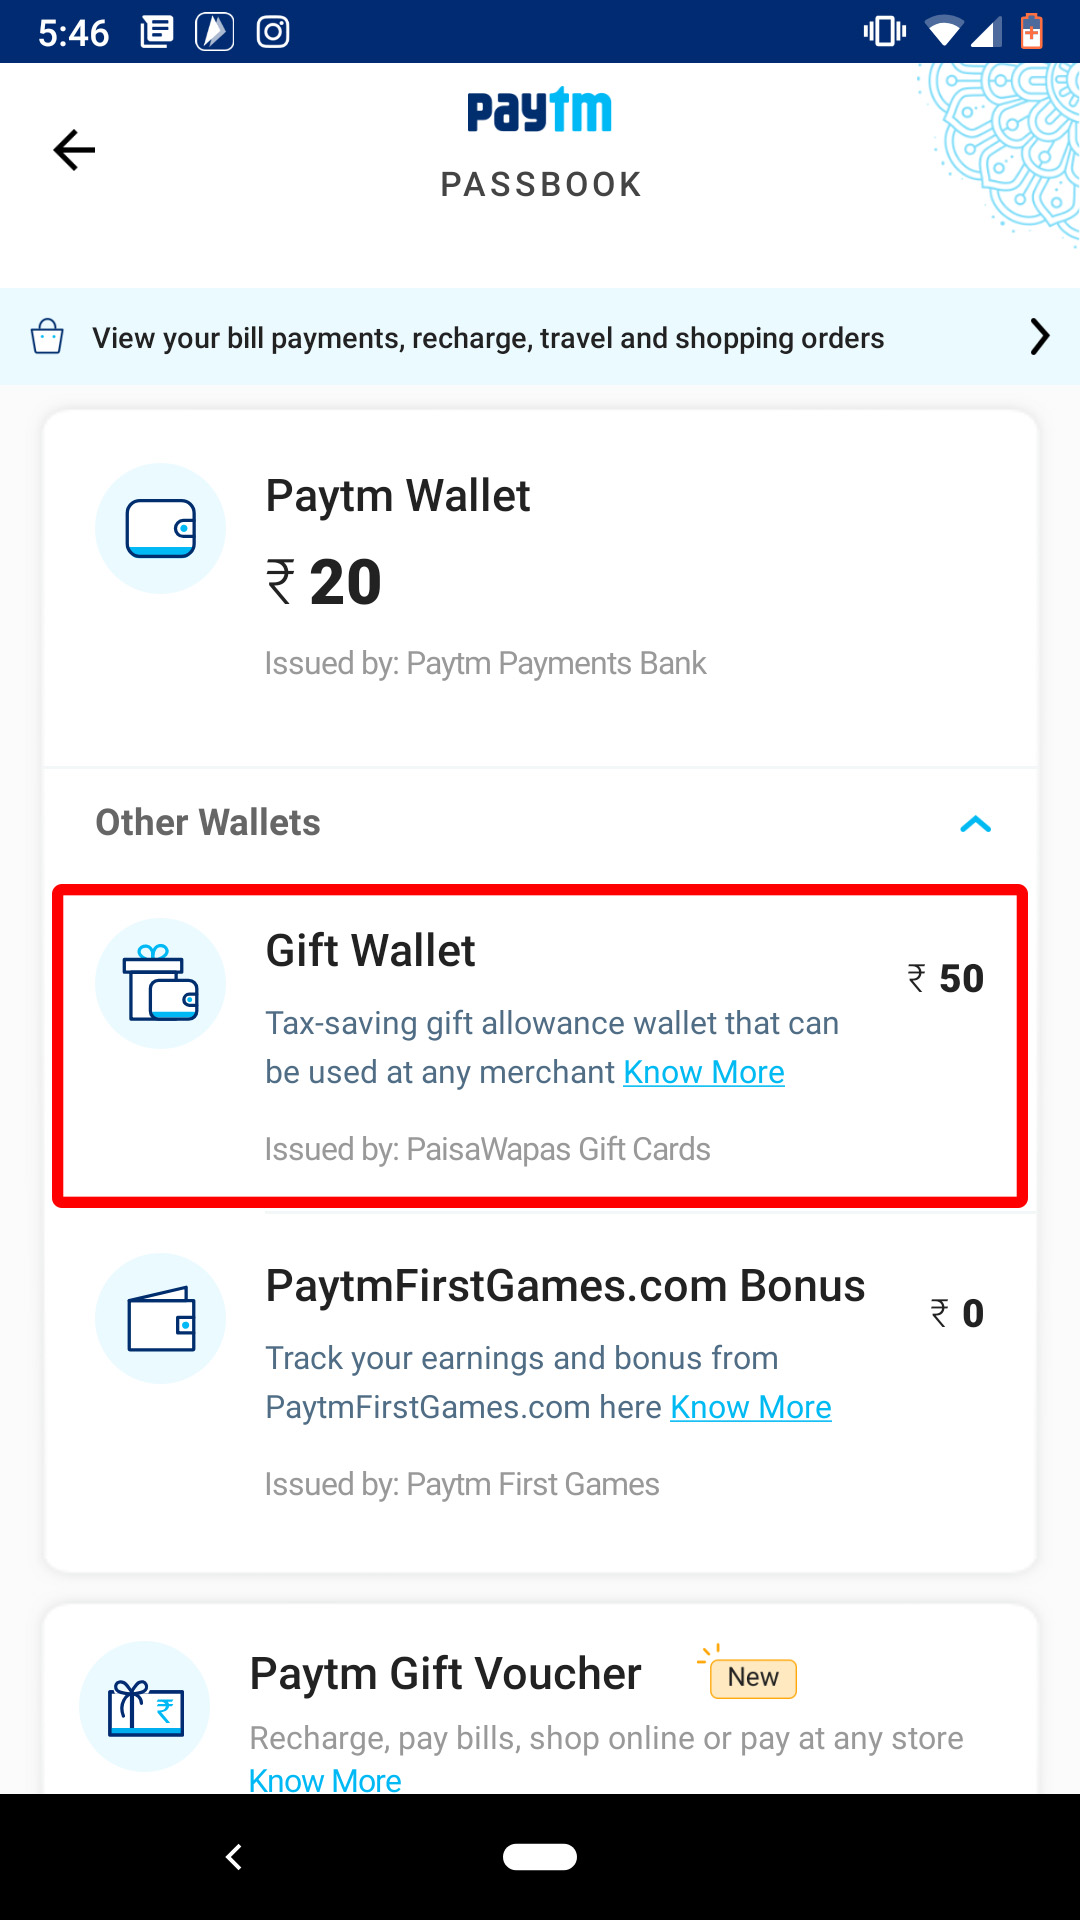 Tap on Gift Wallet